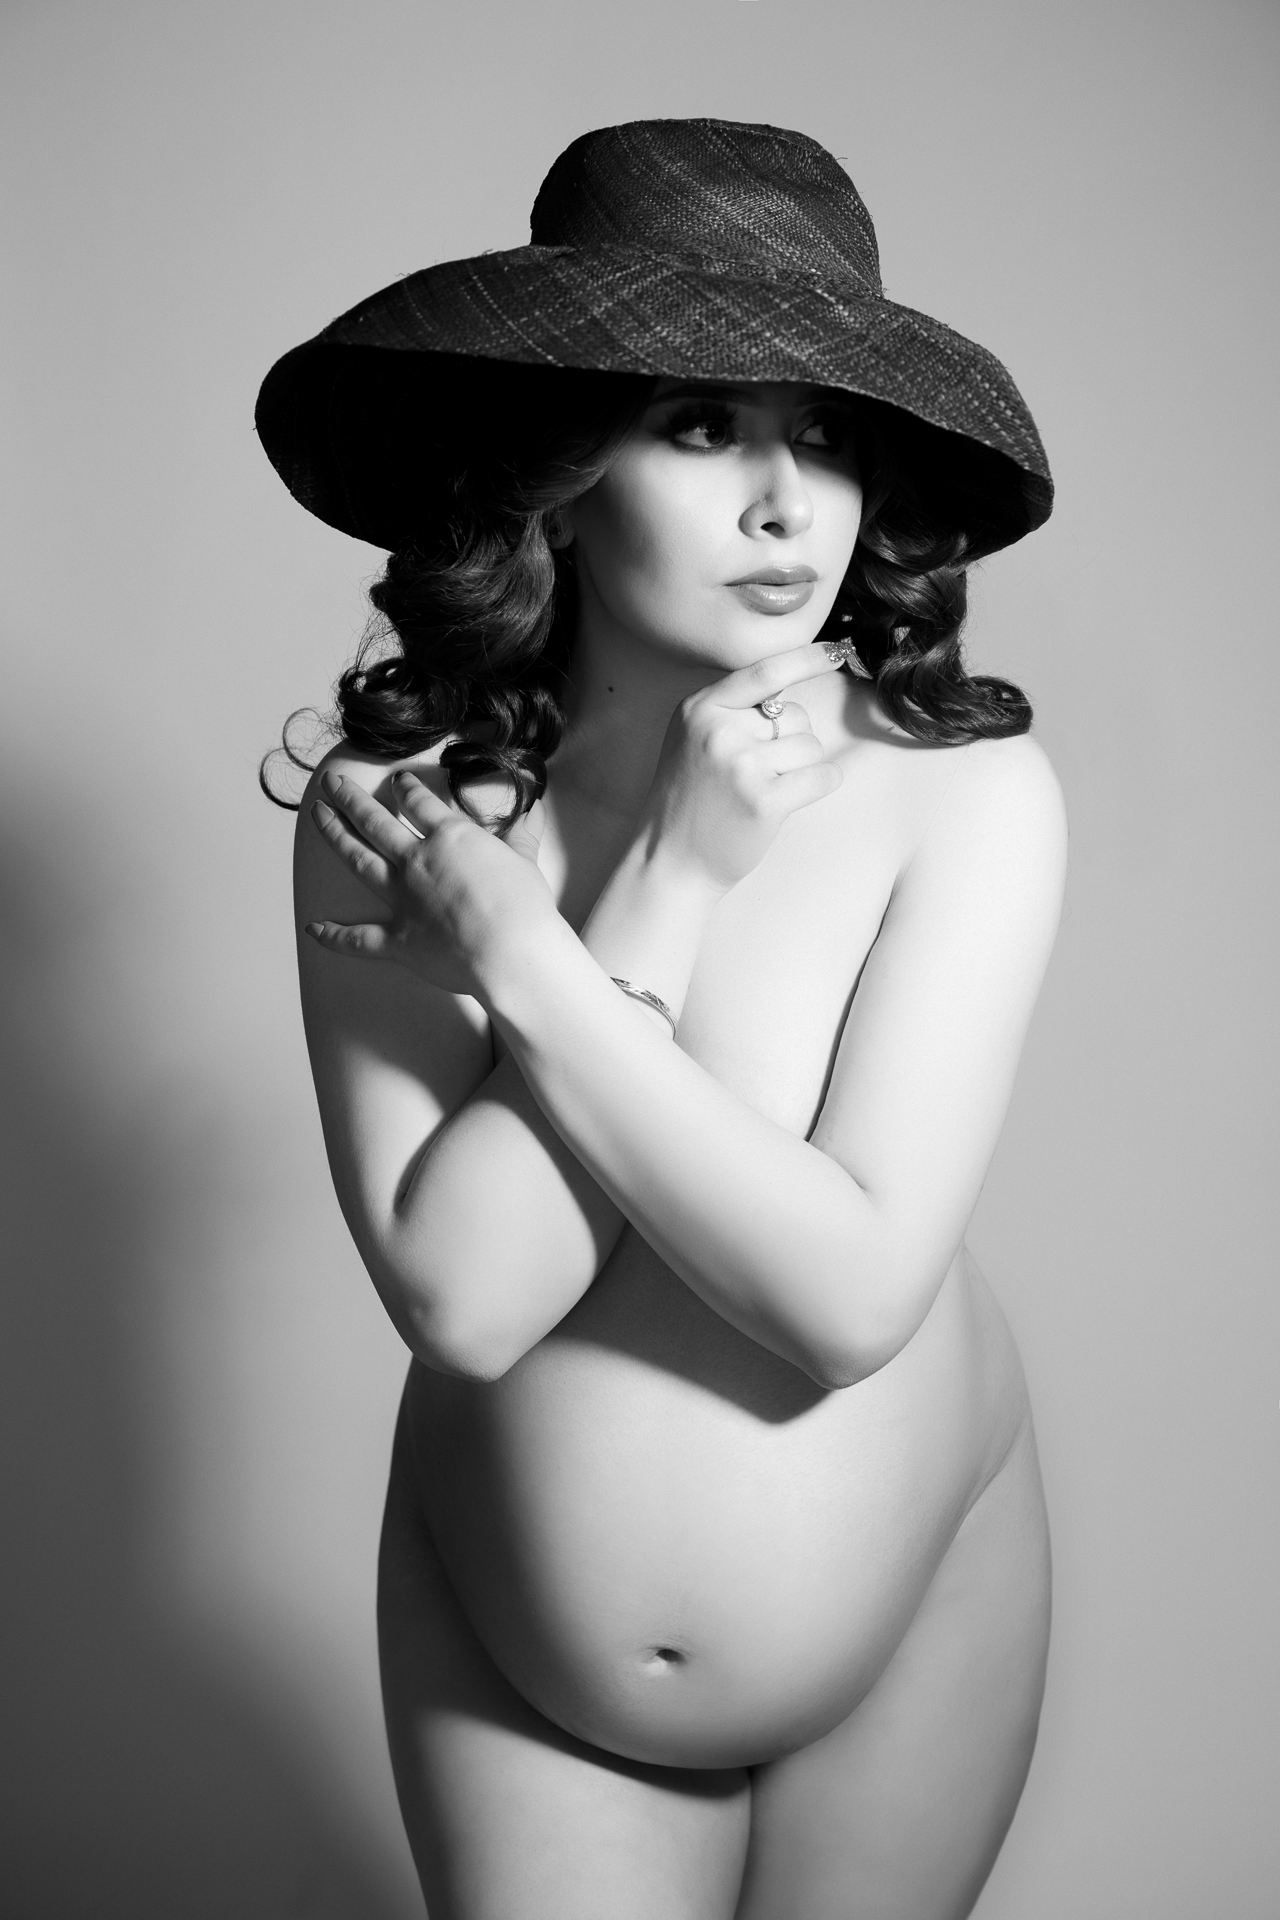 black and white image, non dress pregnant woman wears dark hat on white backdrop